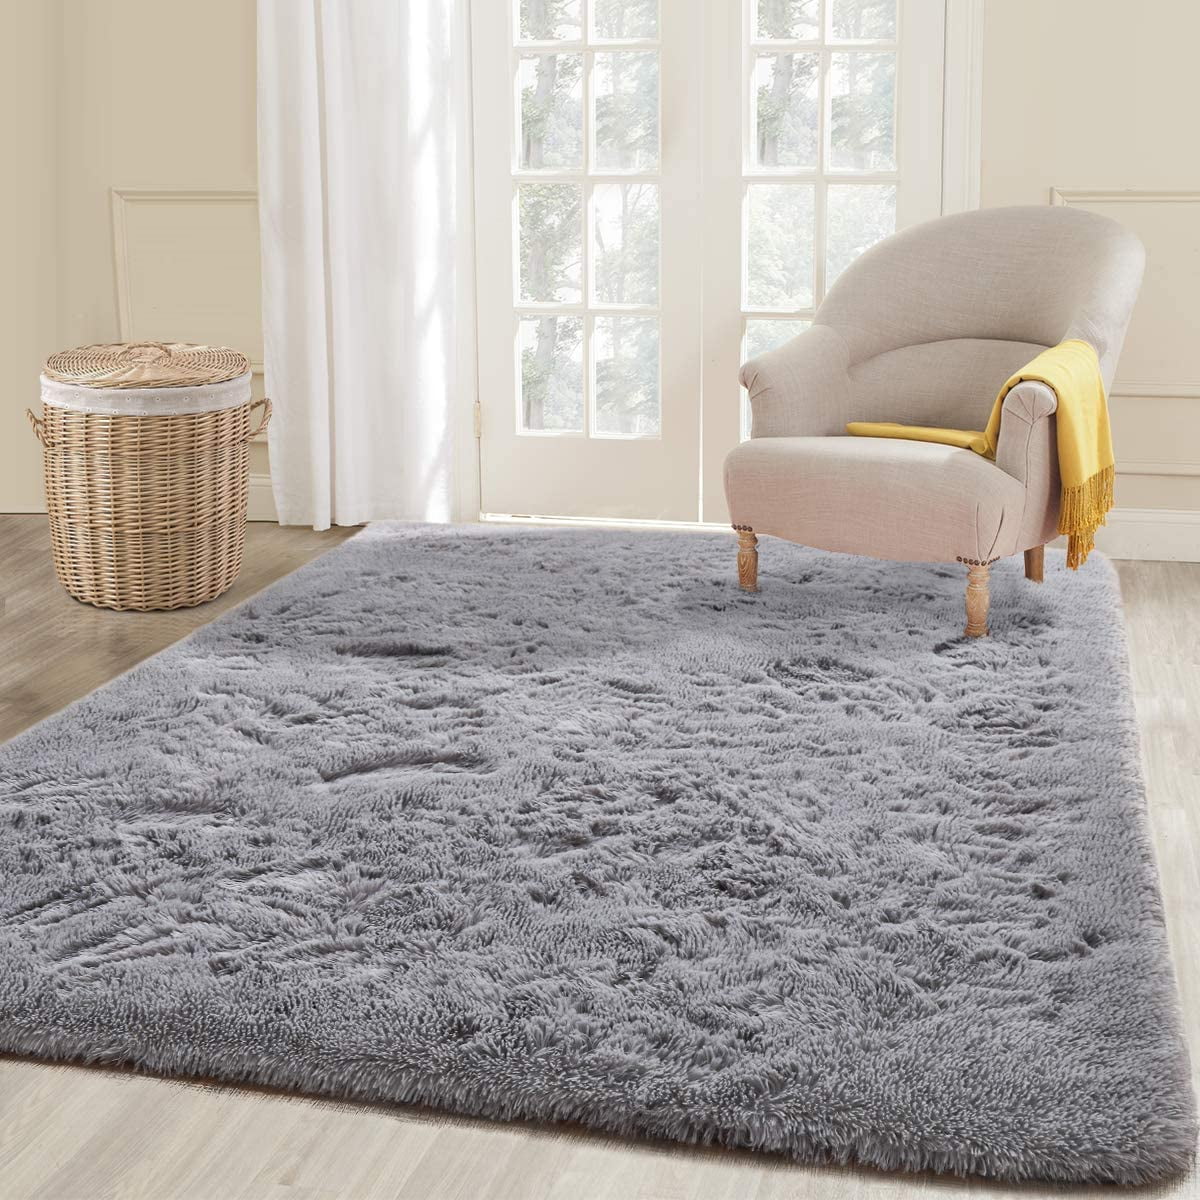 Thick Area Rugs for Living Room Dinin Details about   Ophanie Modern Boho Chic Area Rug Carpet 